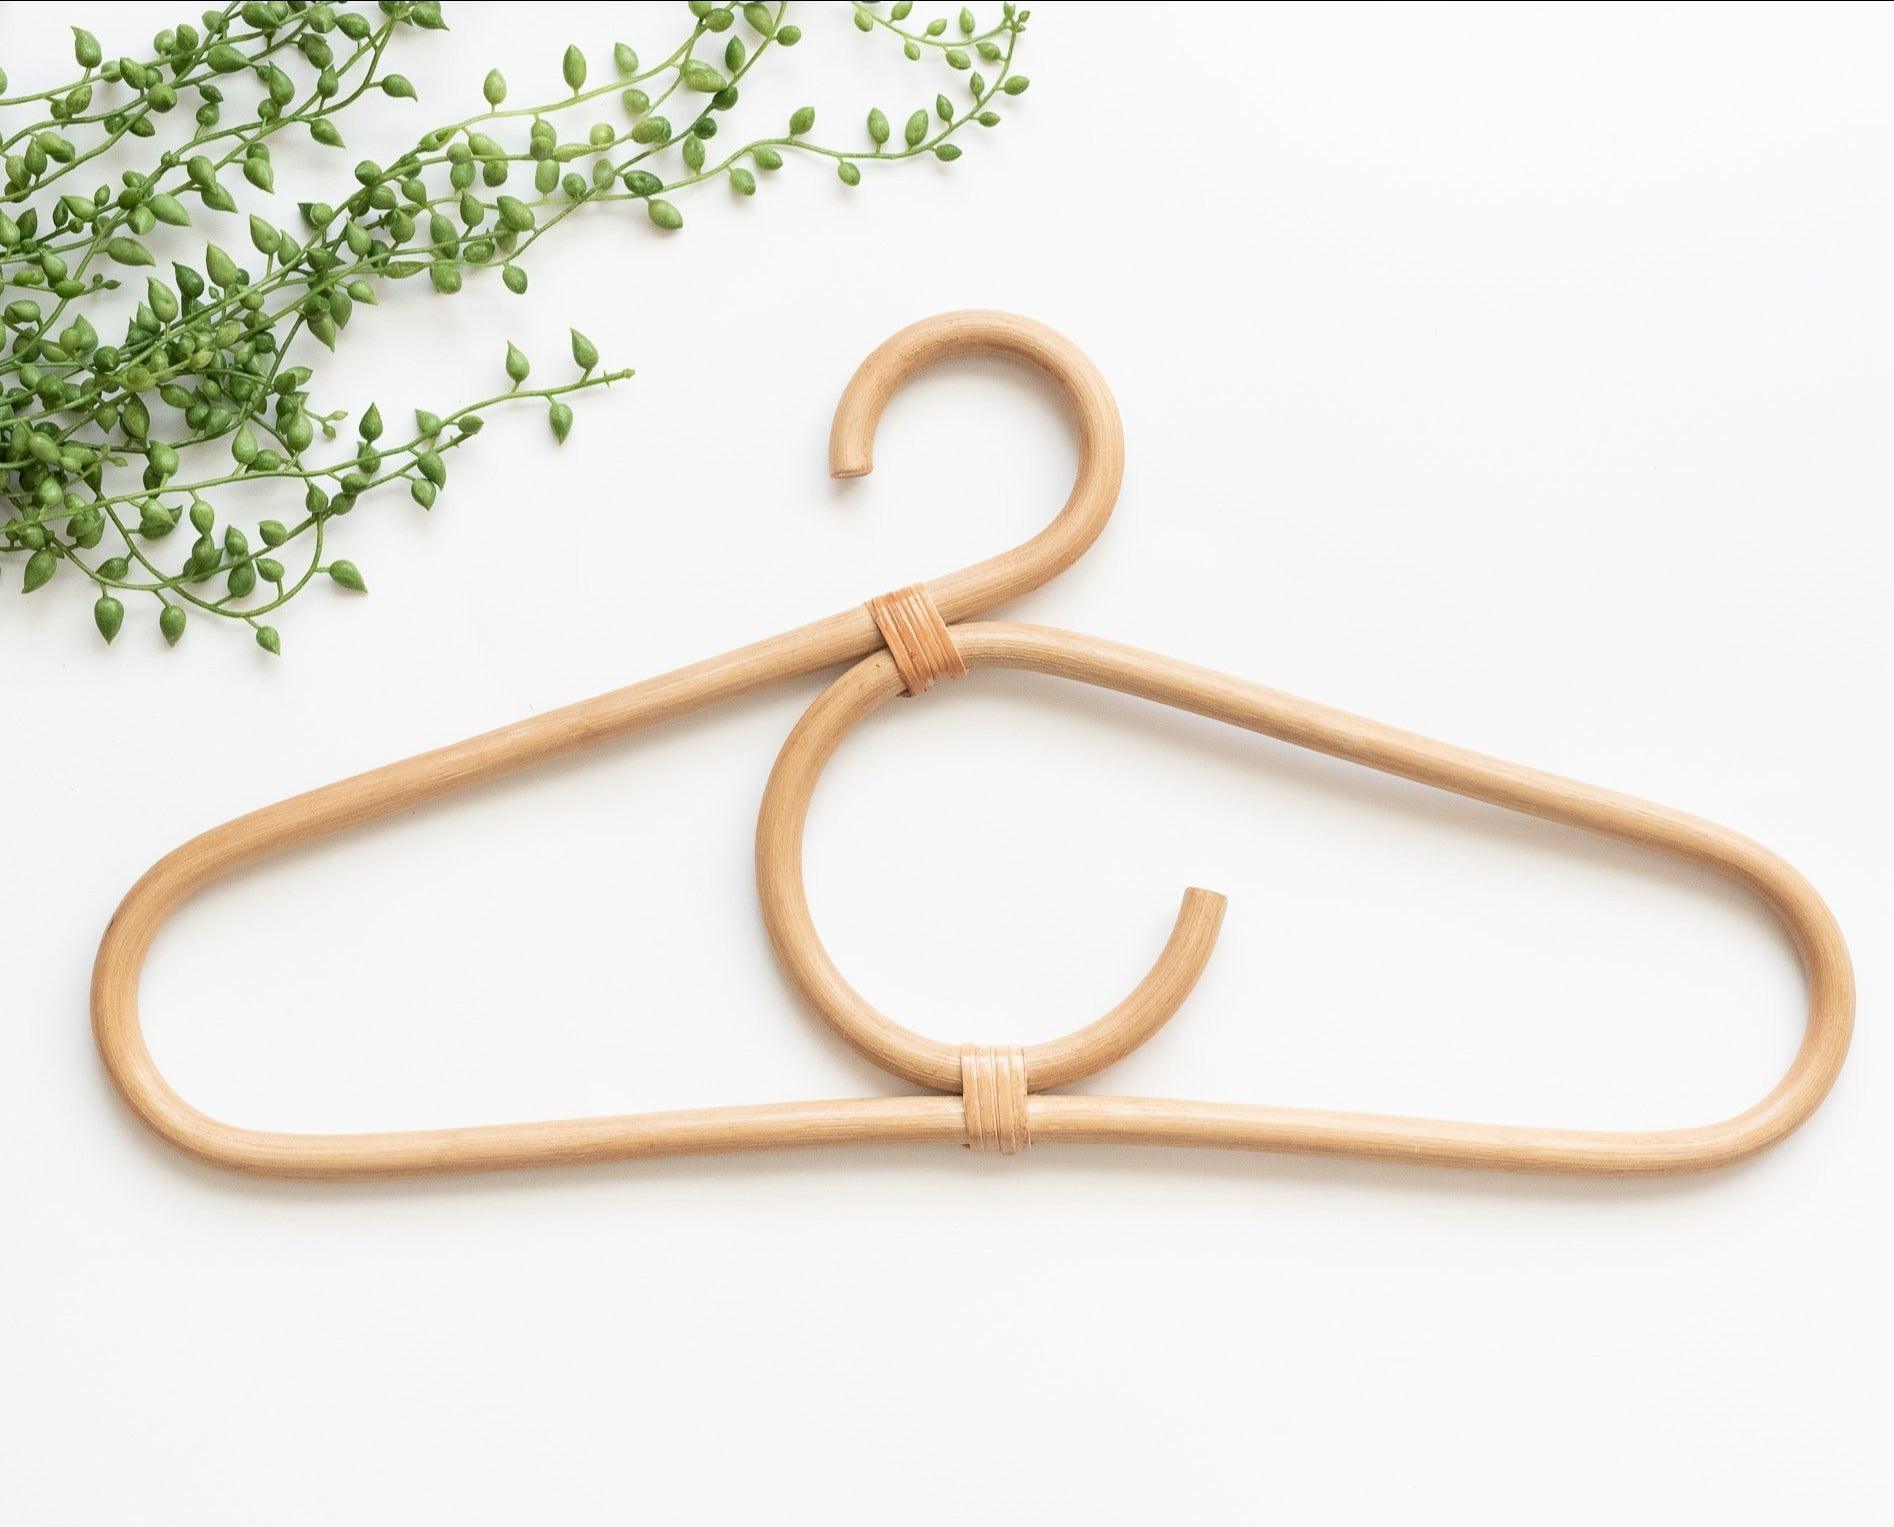 Rattan Full Sized Hangers - Why and Whale